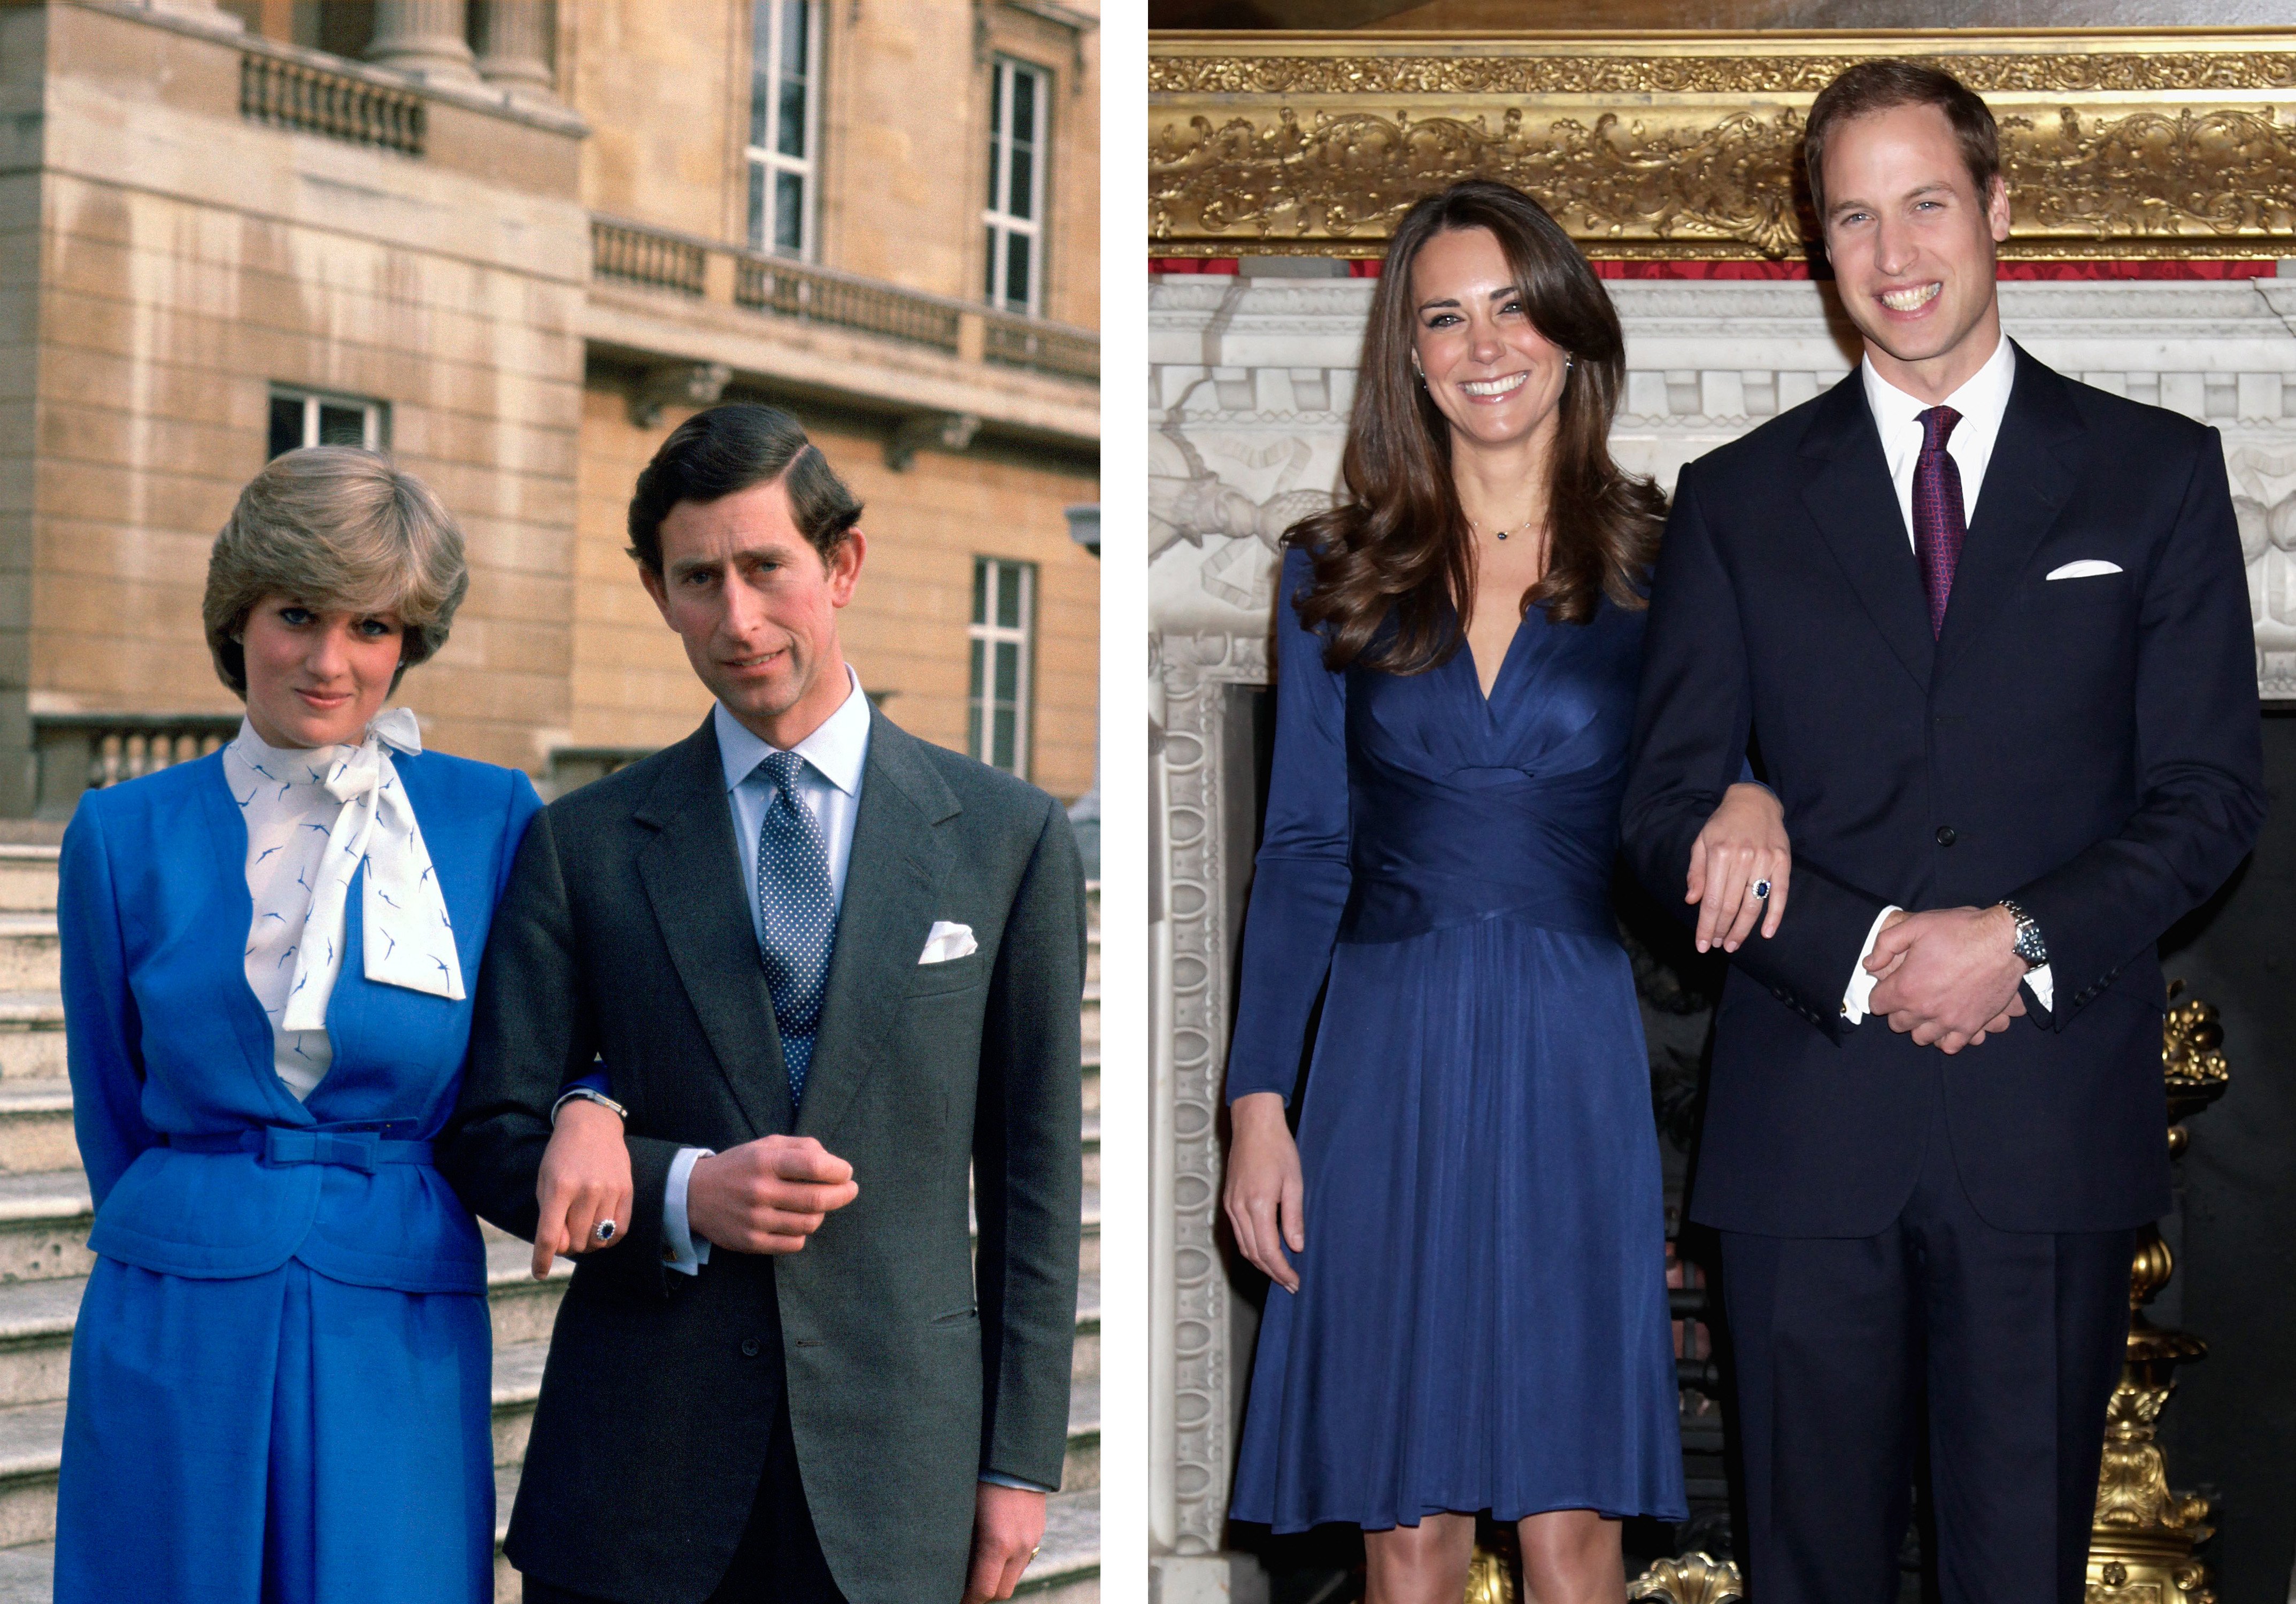 Prince Charles Arm-in-arm With His Fiance, Lady Diana Spencer after announcing their engagement .[Left] Prince William and Kate Middleton after their engagement [Right] | Source: Getty Images